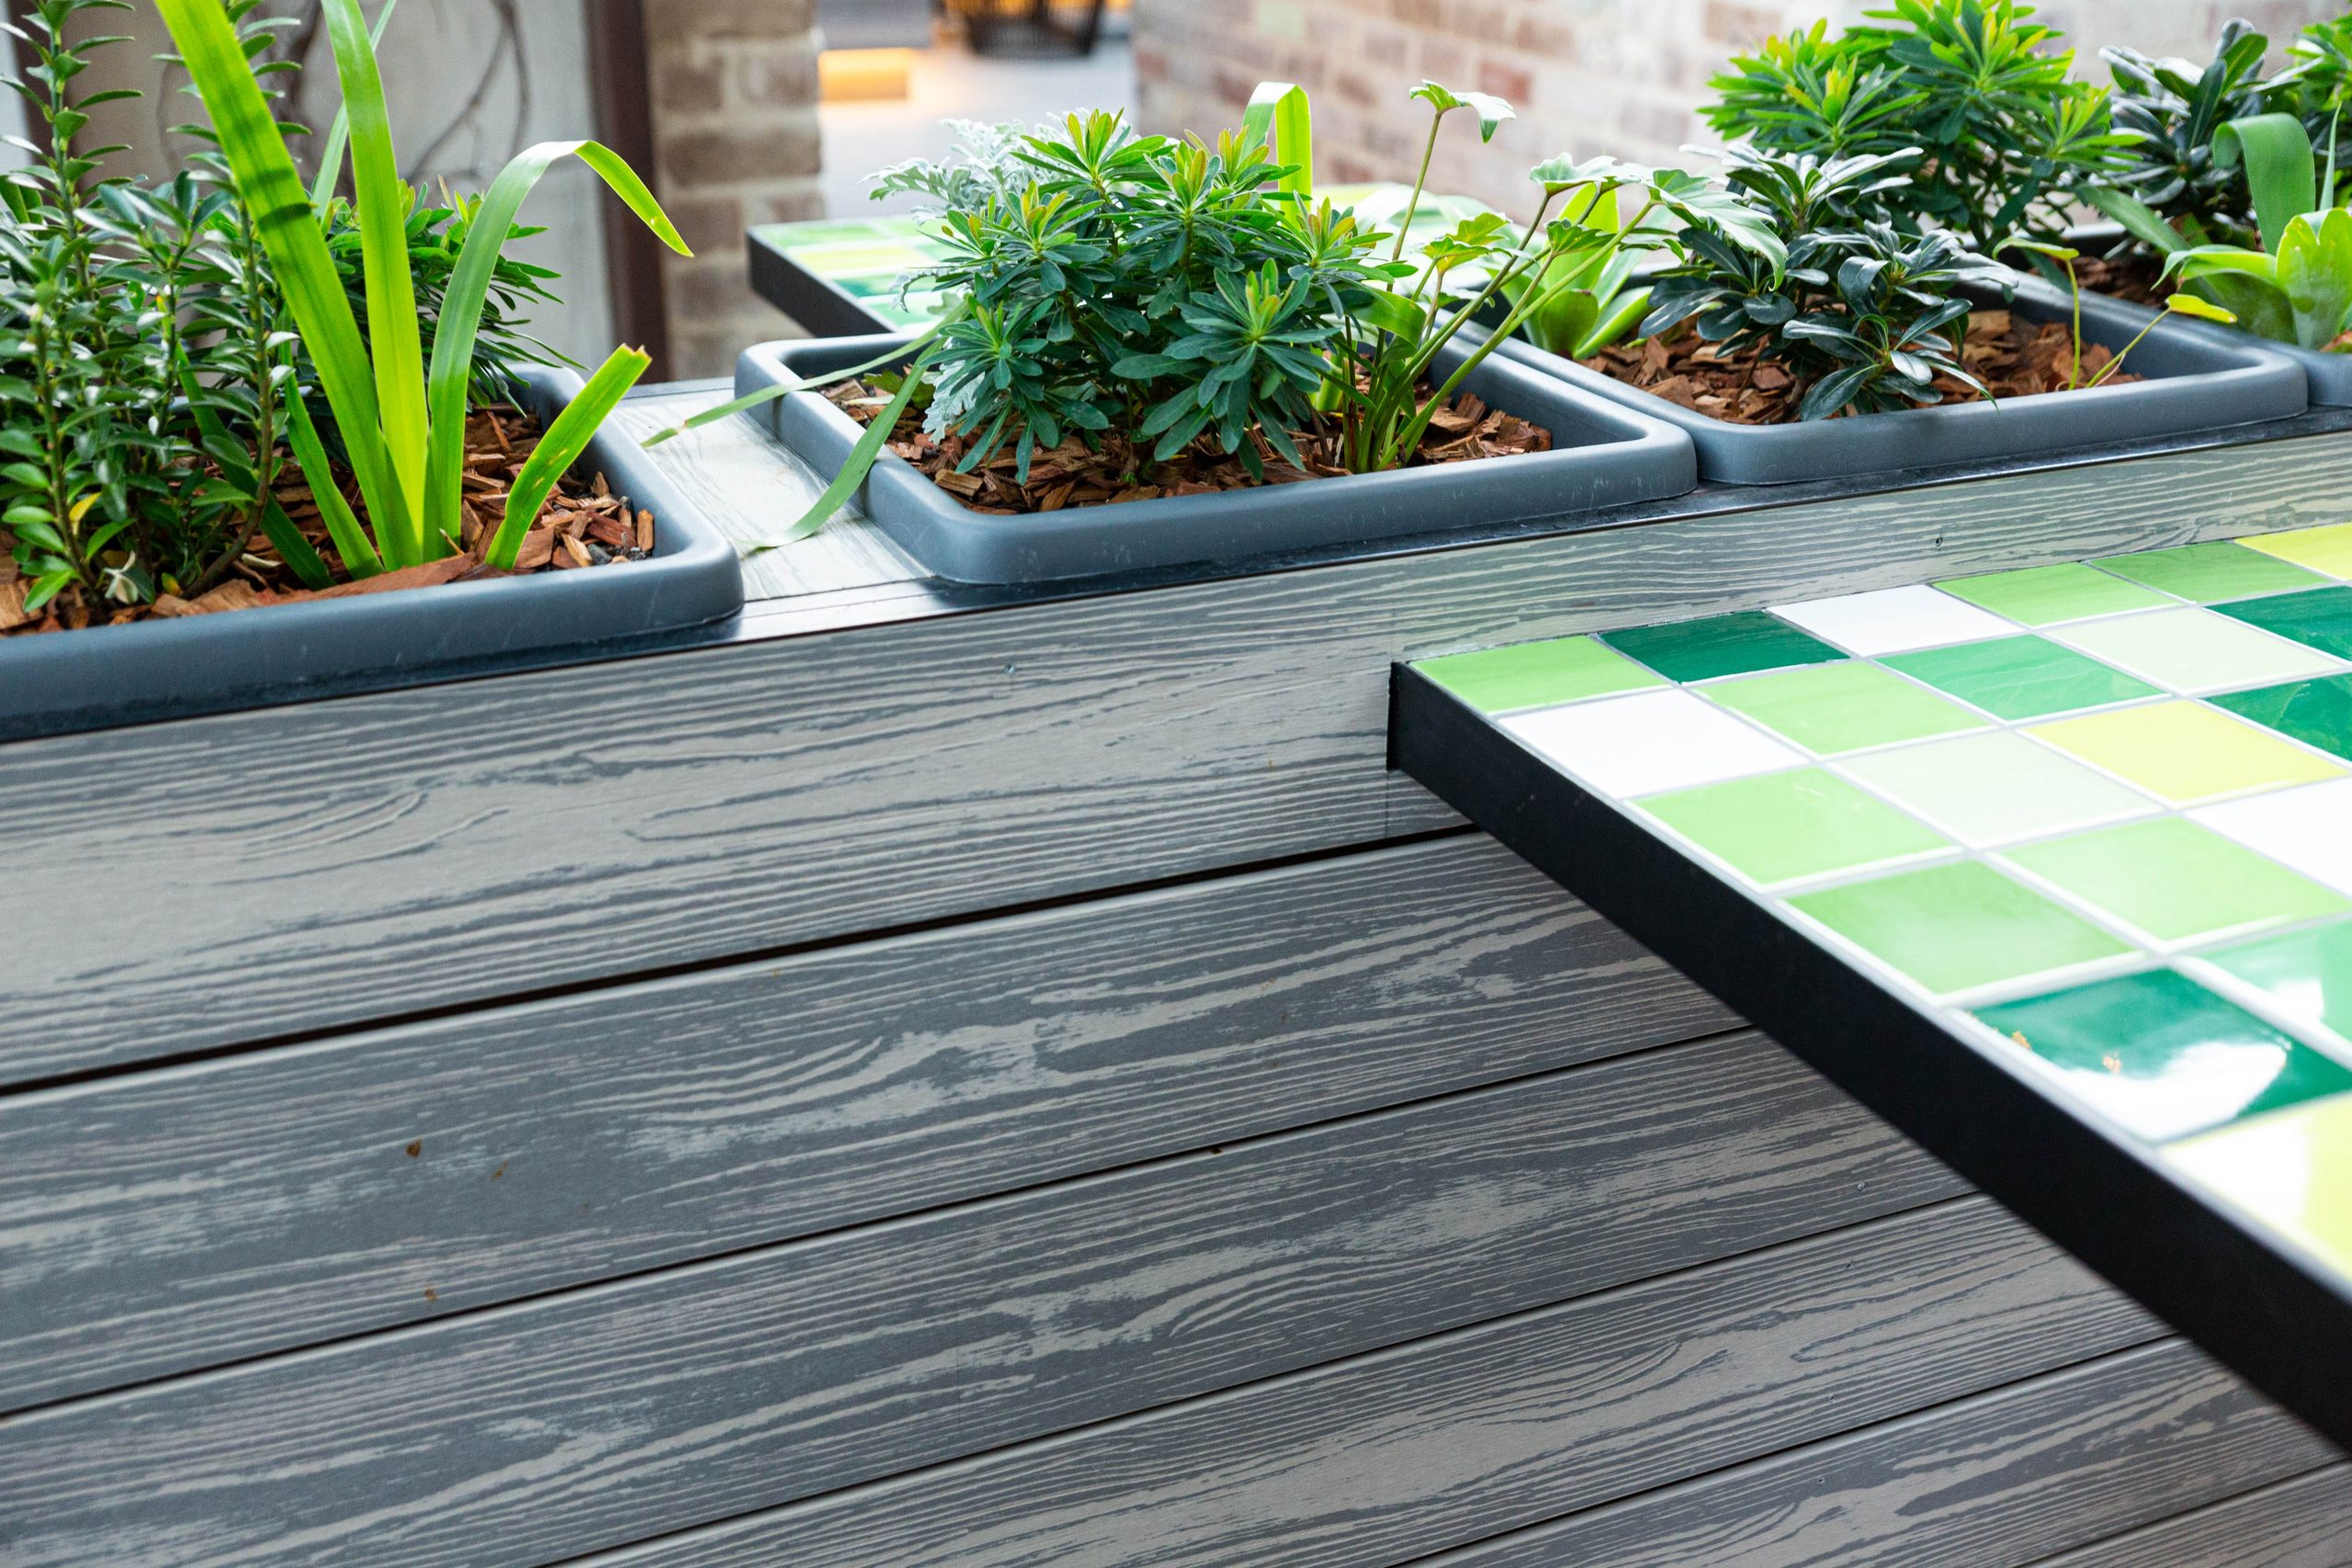 A close up of silvery grey composite boards used to construct planter boxes